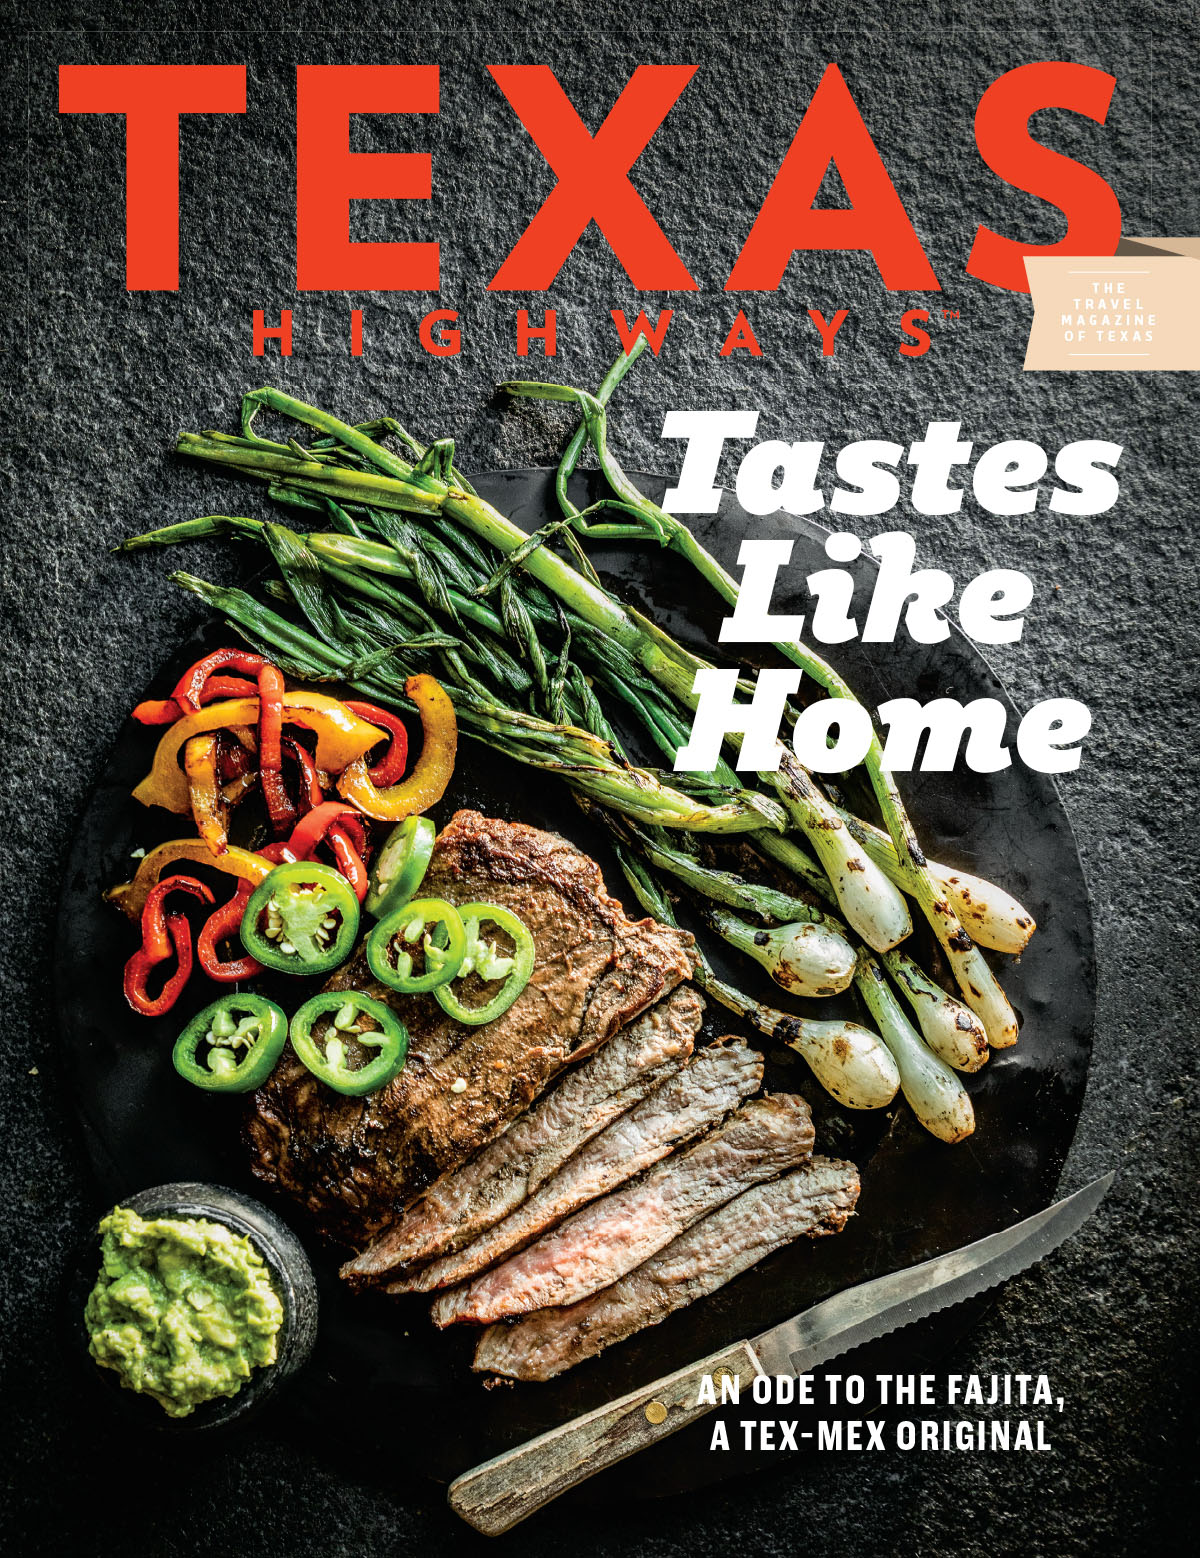 The October 2023 issue of Texas Highways "Tastes Like Home"